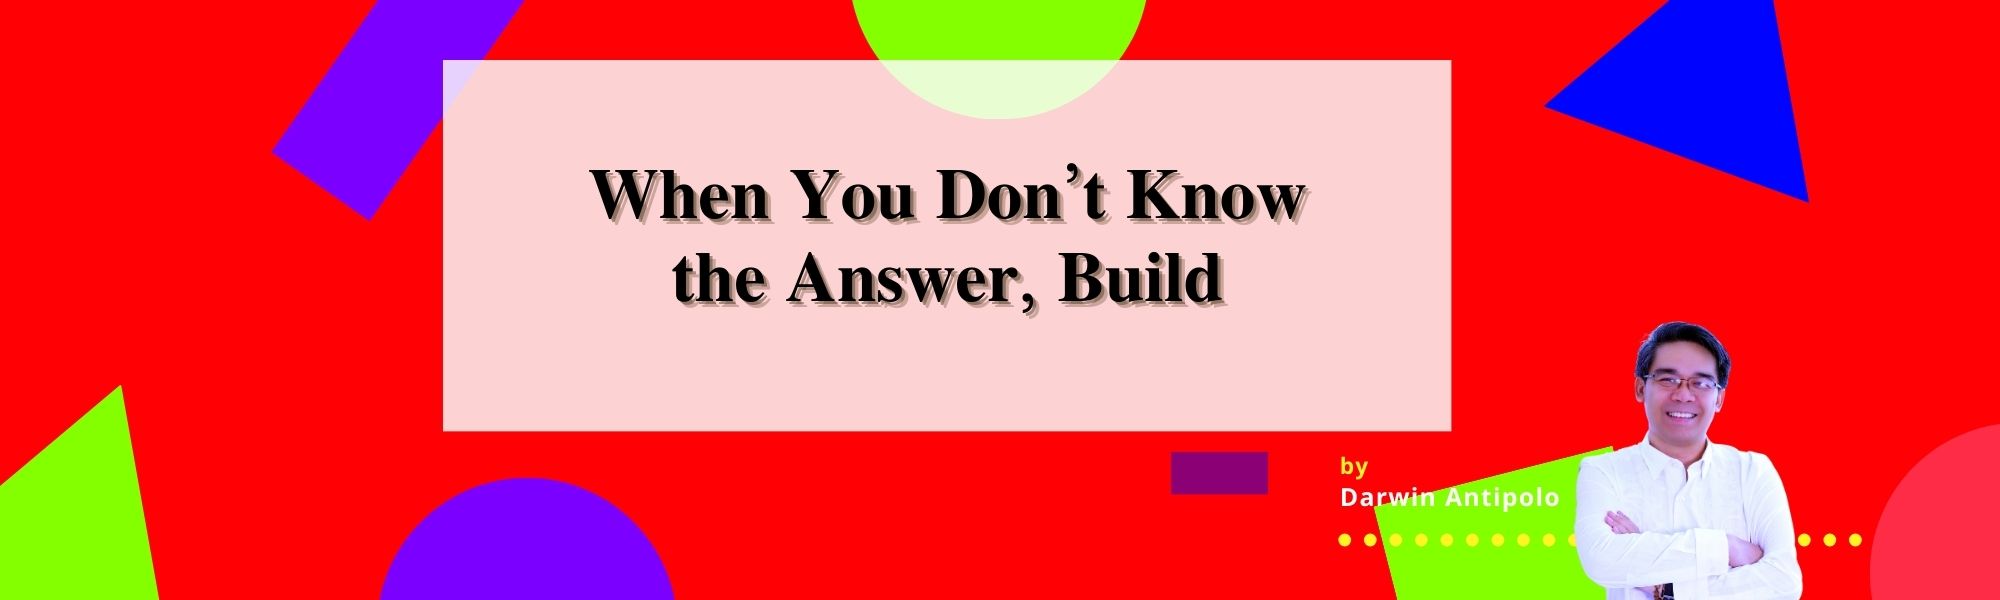 Article When You Don't Know the Answer, Build